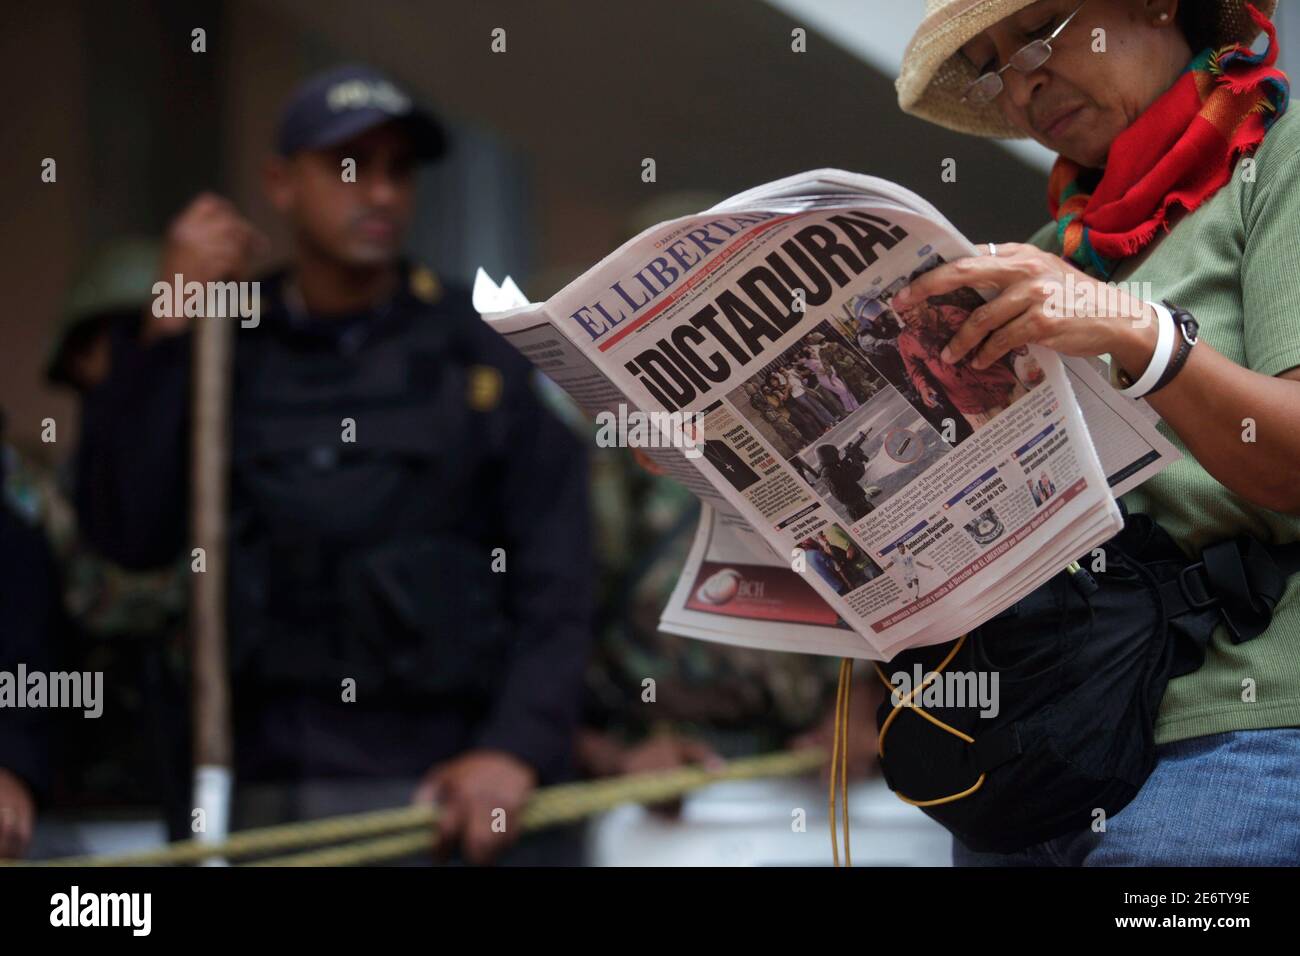 A supporter of Honduras' ousted President Manuel Zelaya reads a copy of the 'El Libertador' newspaper with the headline 'Dictatorship' outside the National Congress in Tegucigalpa July 20, 2009. Honduras' de facto leader Roberto Micheletti came under increased pressure on Monday to hand power back to the ousted president with Europe halting economic aid and top Latin American officials warning of bloodshed if he does not back down. REUTERS/Edgard Garrido (HONDURAS POLITICS CONFLICT MEDIA) Stock Photo